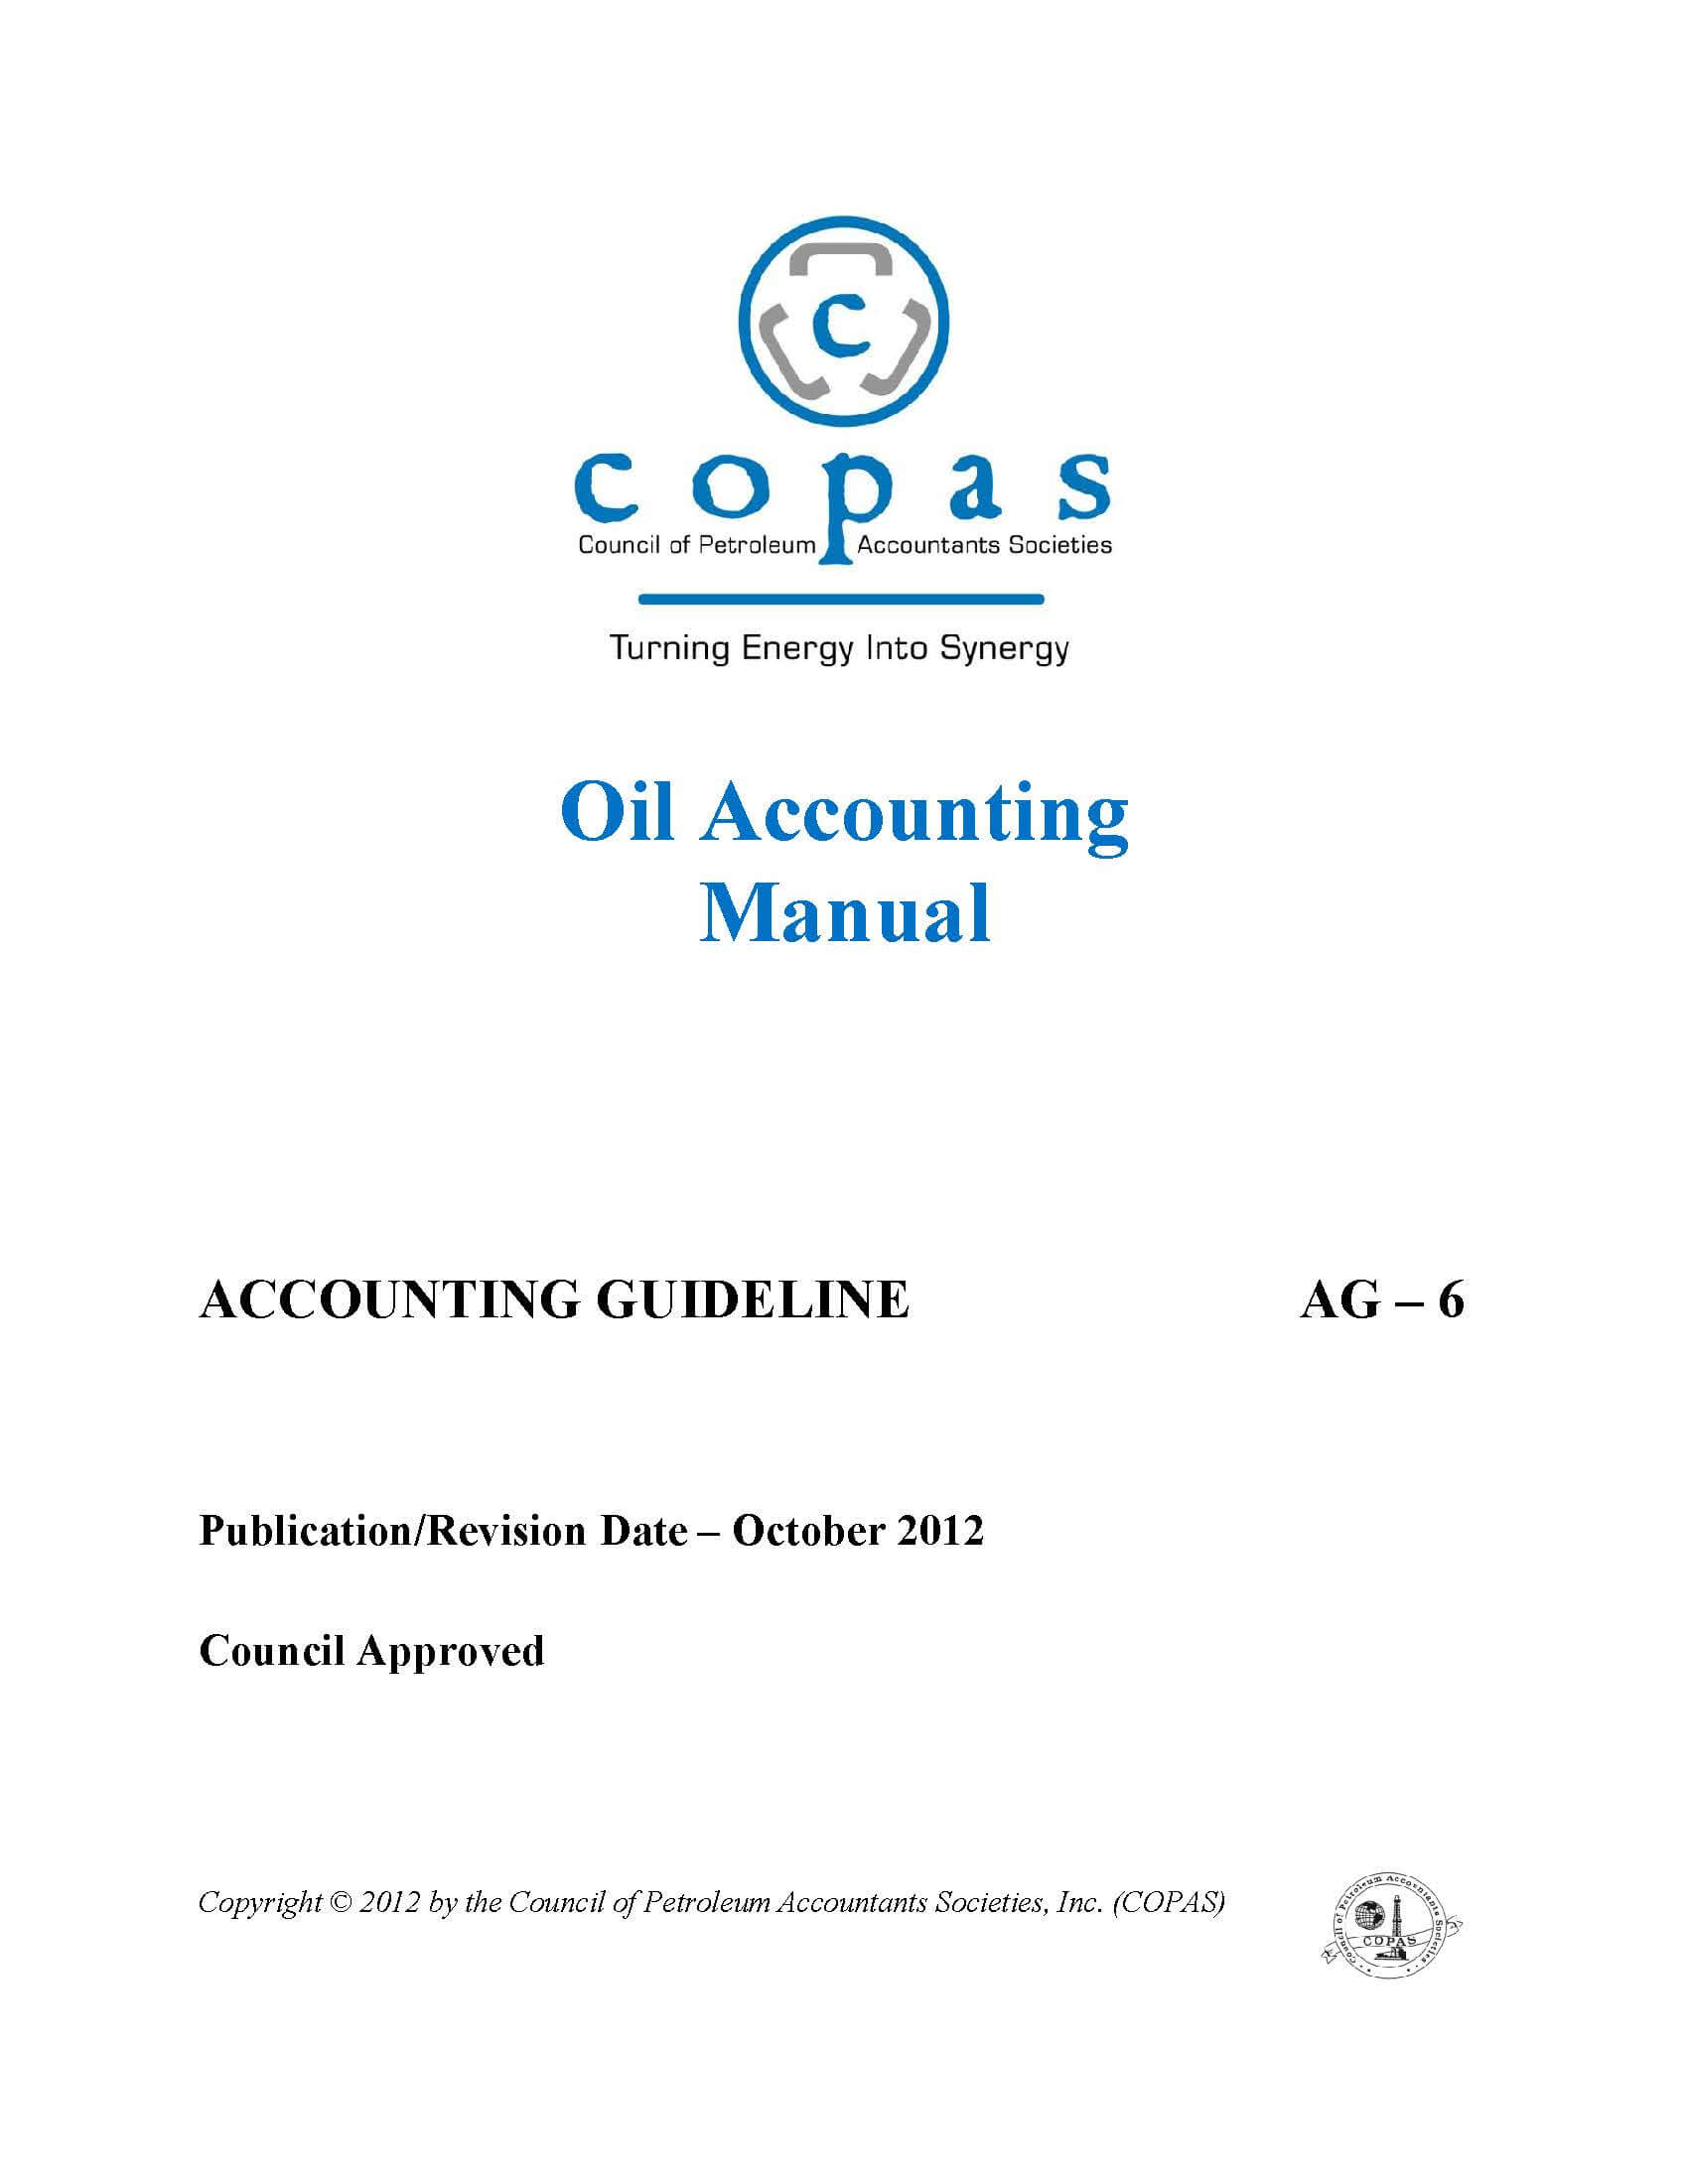 AG-6 Oil Accounting Manual